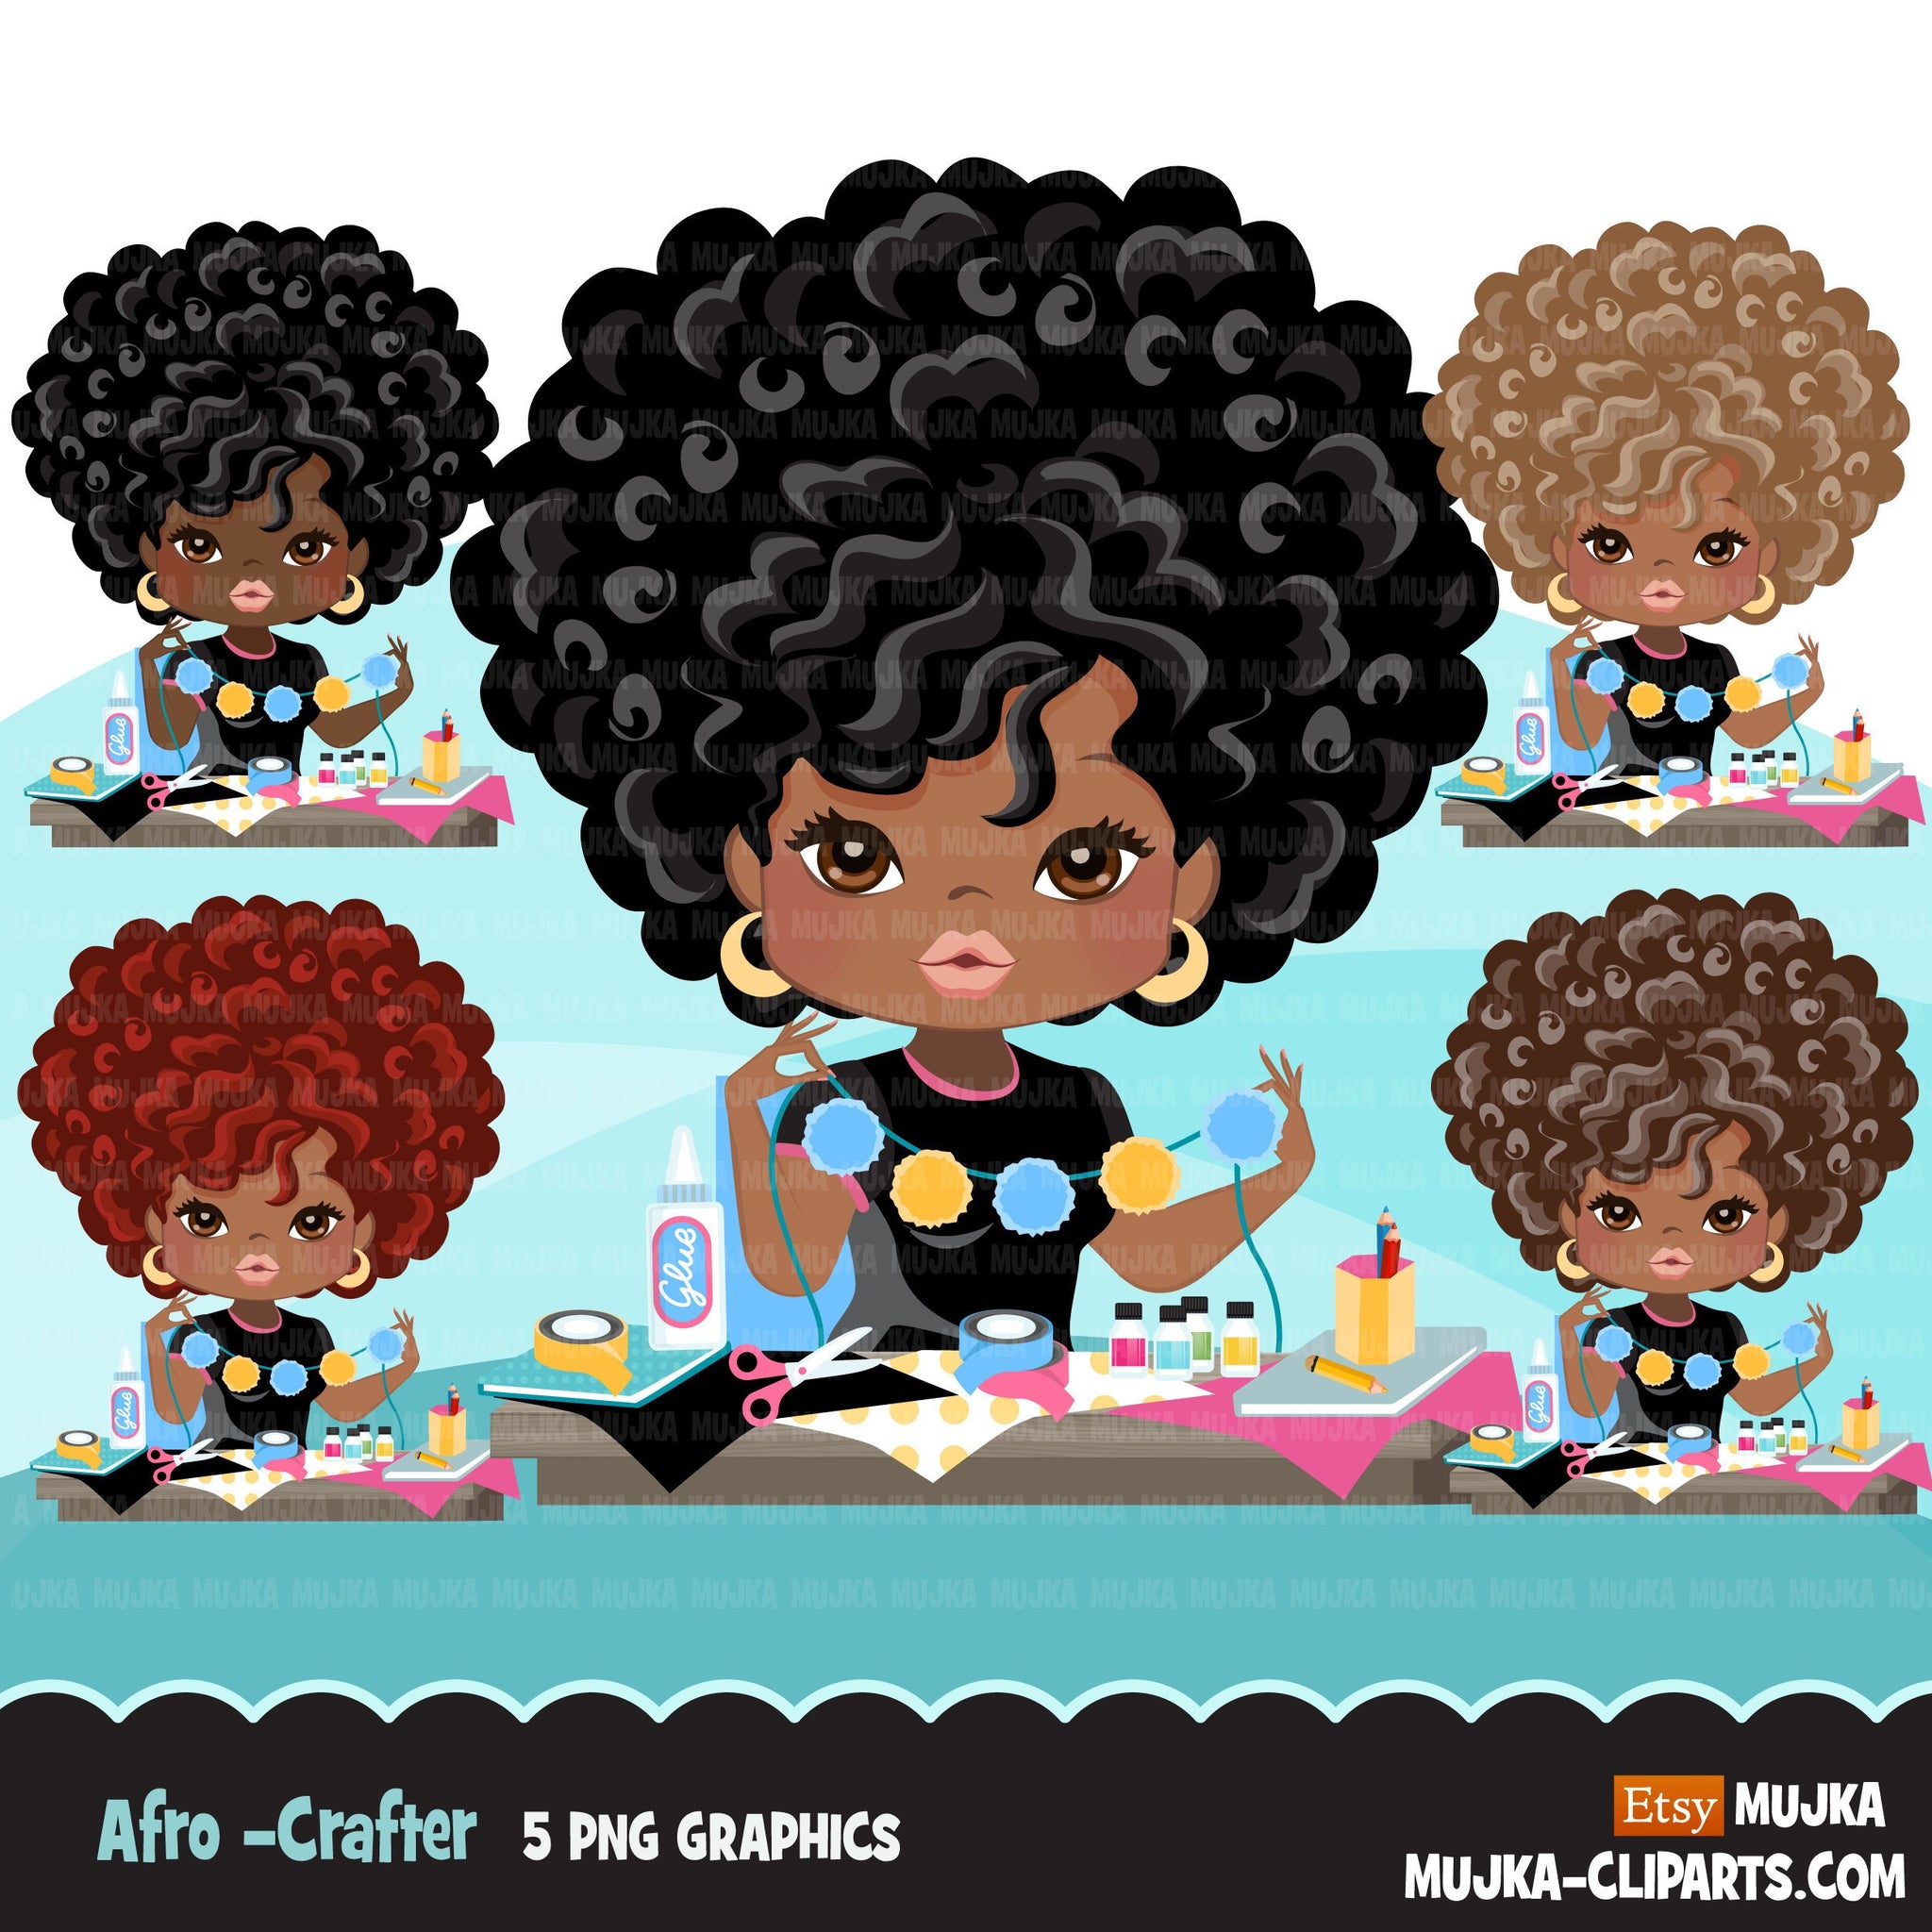 Afro black woman crafter avatar clipart with scrapbooking graphics